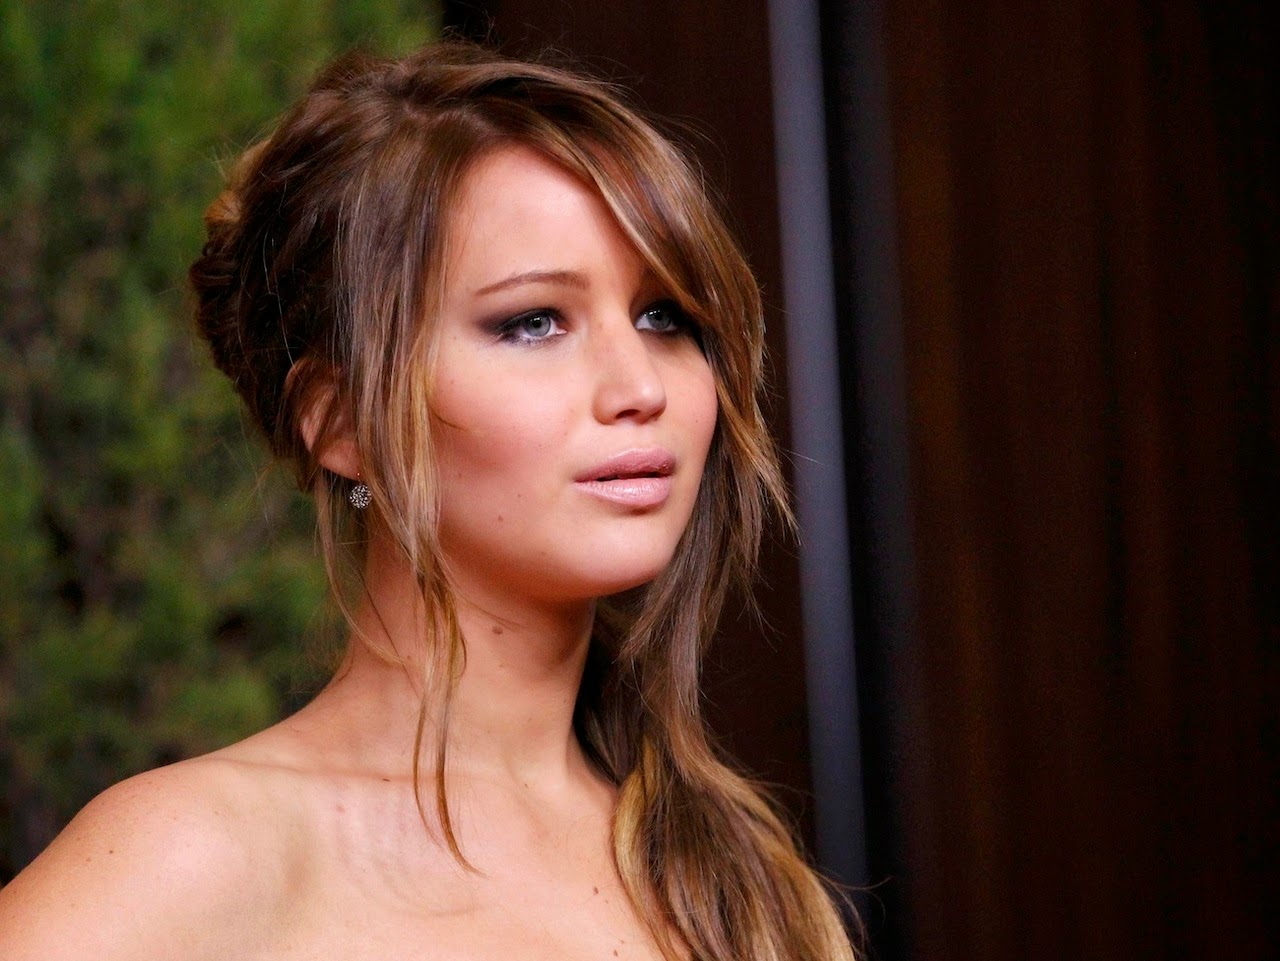 Jennifer Lawrence Leaked Photos To Remain On Adult Website Due To